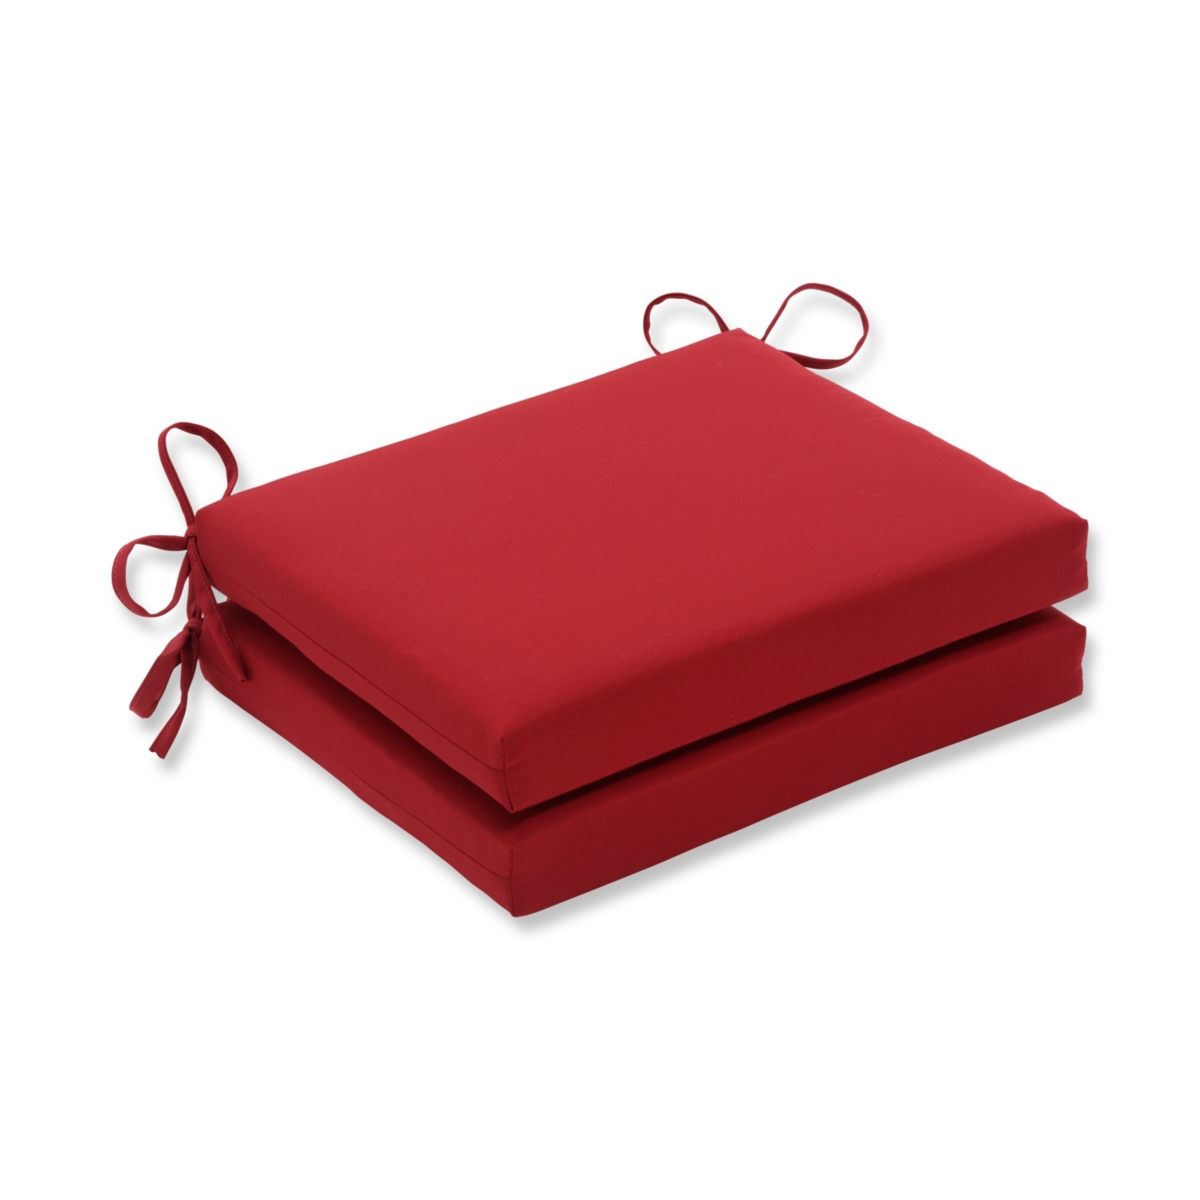 Pompeii Red Squared Corners Seat Cushion - Red